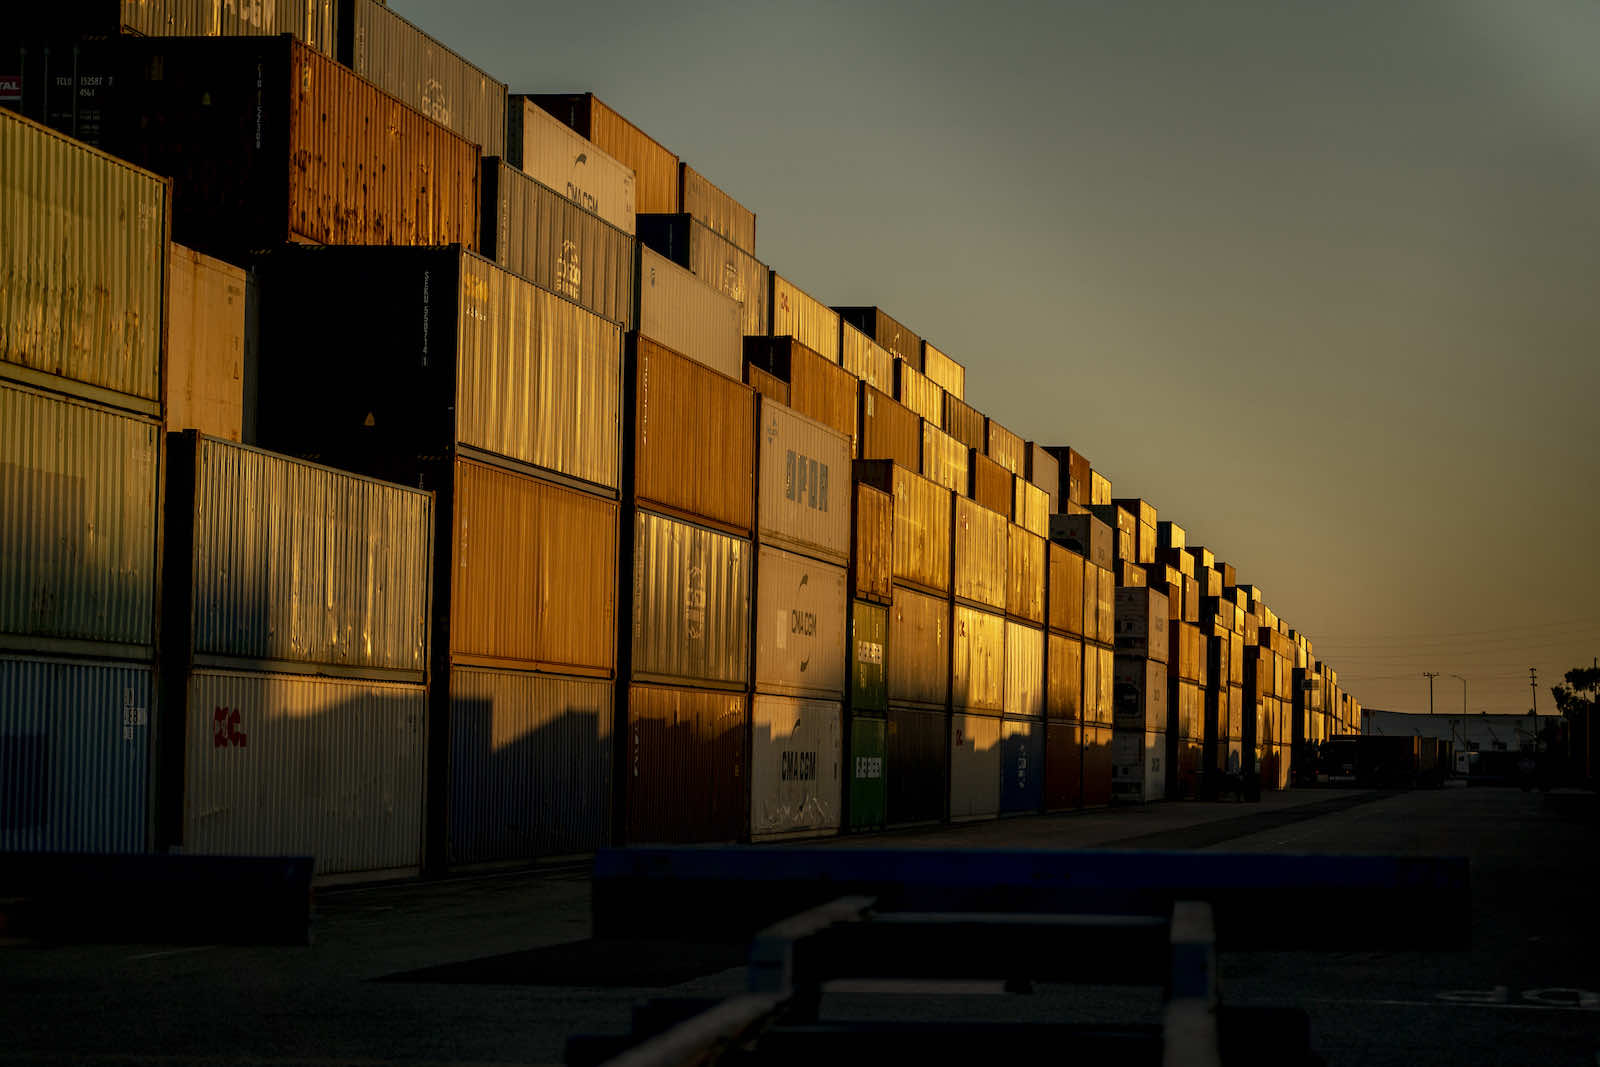 US President Joe Biden has ordered the Port of Los Angeles begin operating 24 hours a day and seven days a week in an effort to move goods and clear a backlog (Kyle Grillot/Bloomberg via Getty Images)